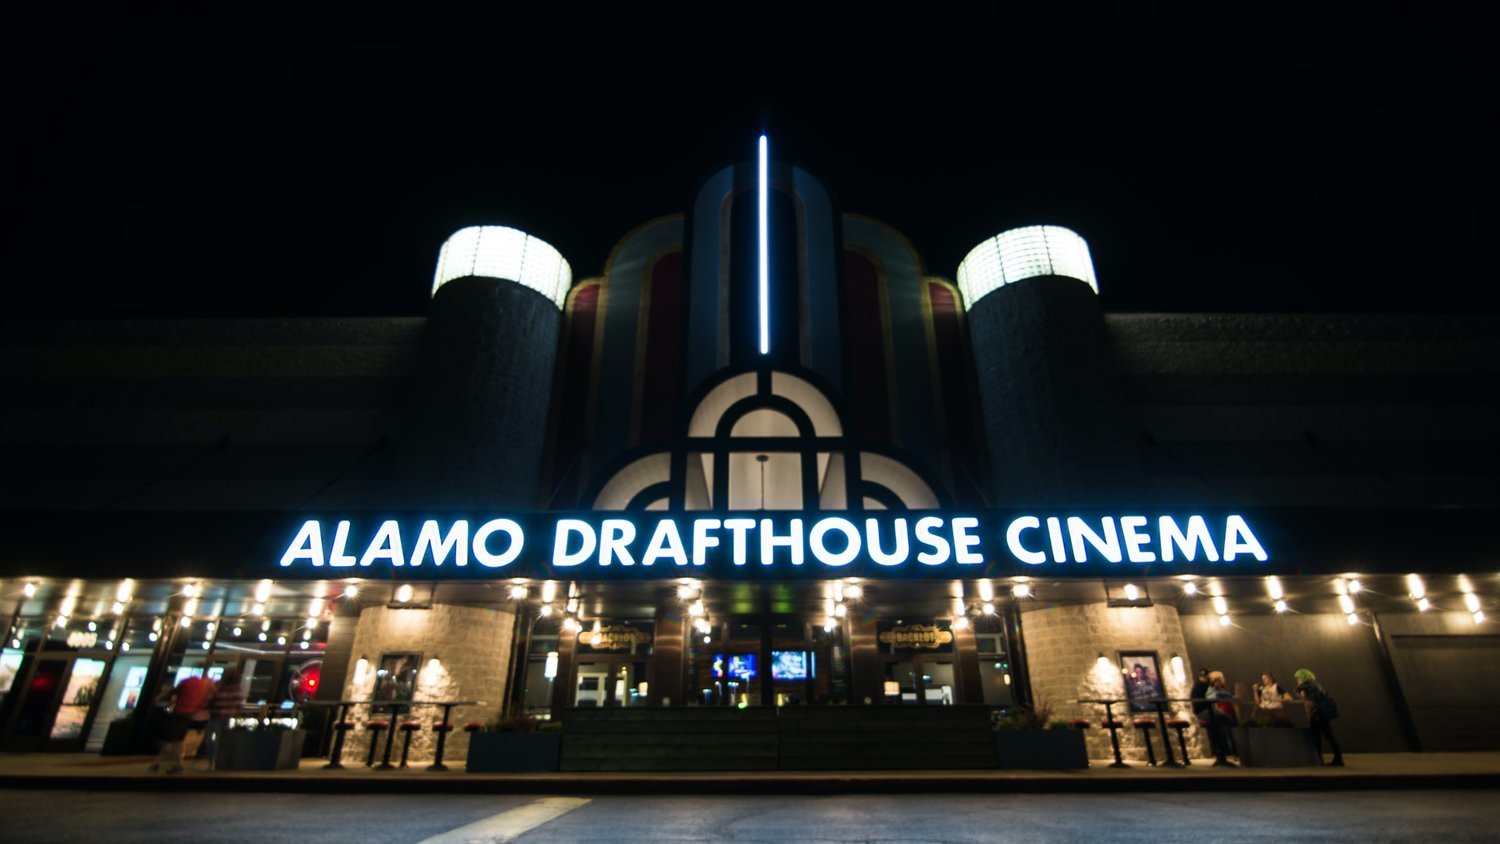 Alamo Drafthouse Cinema is receiving $15,000 in county-approved federal funds.